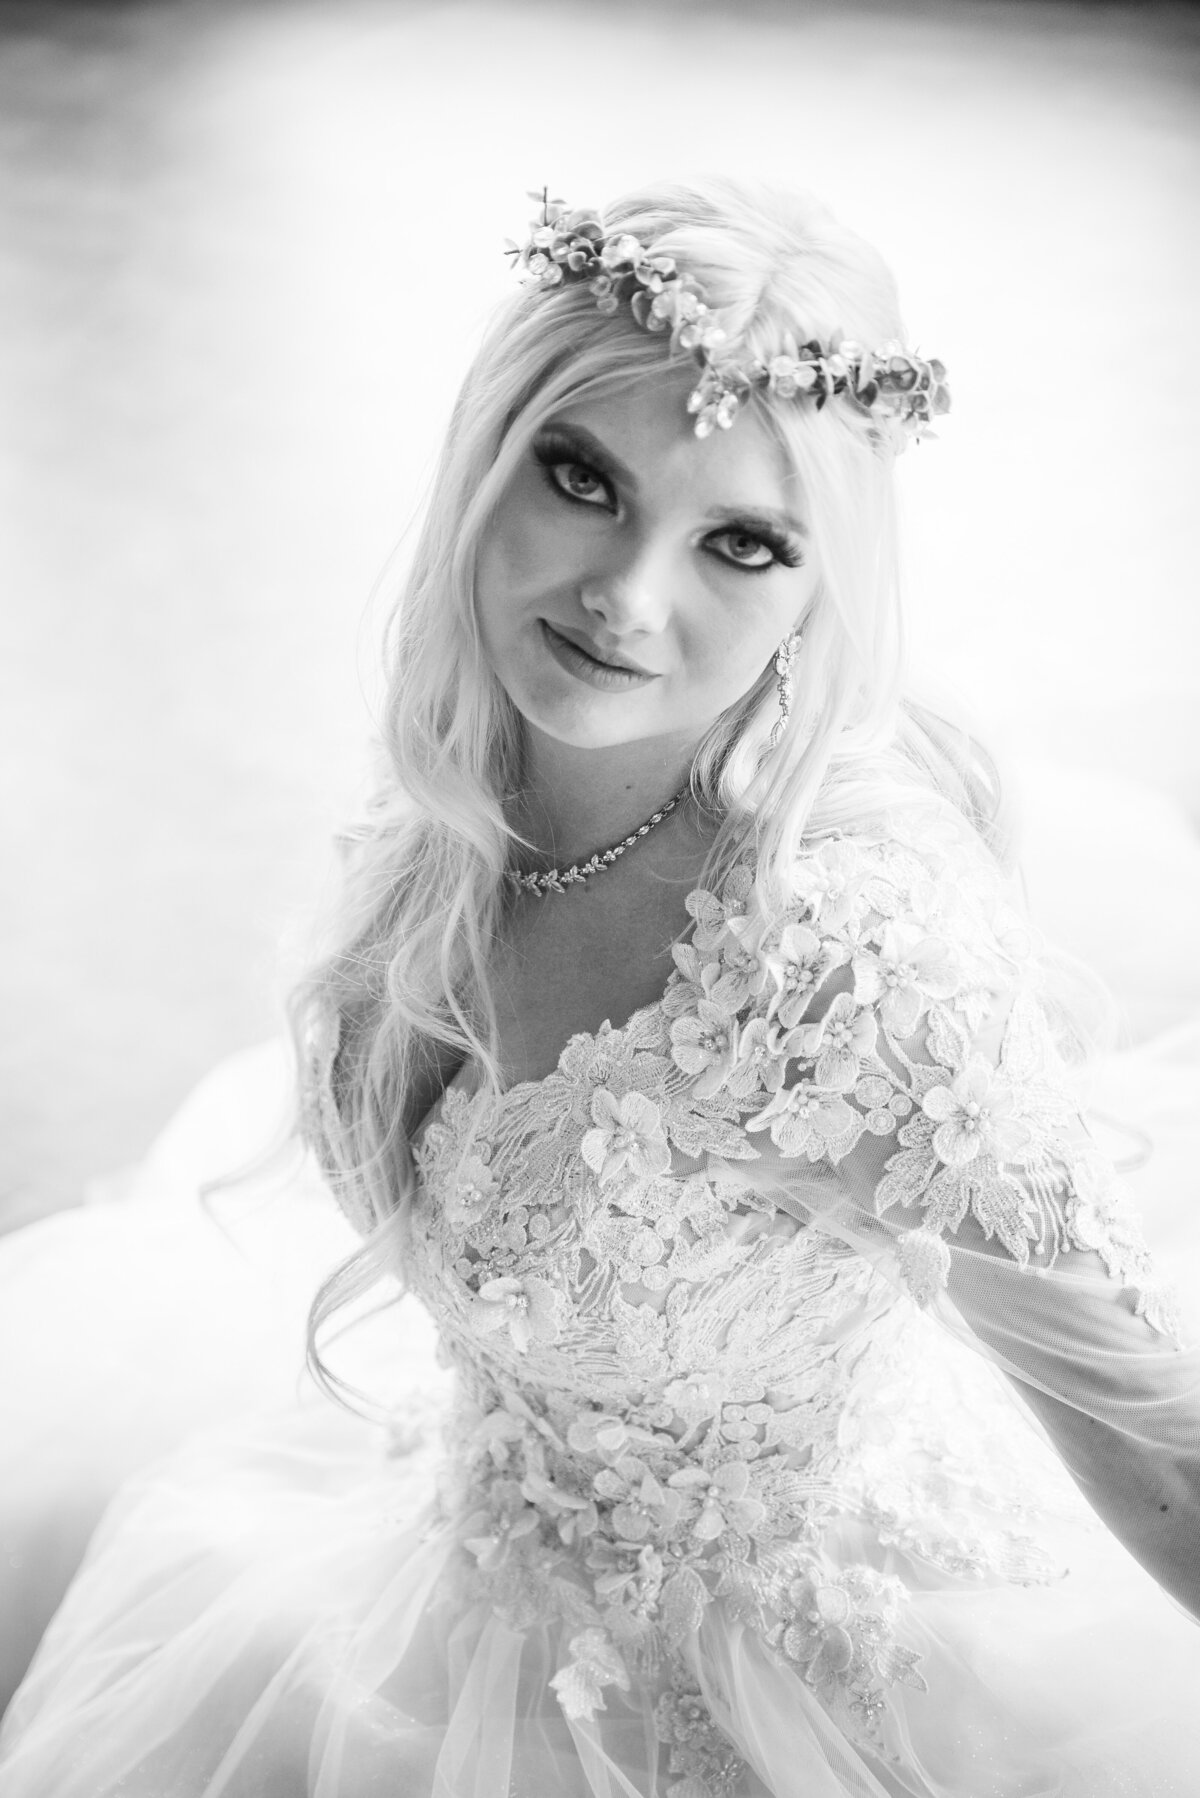 A bride wearing a long sleeve dress and intricate headpiece stares at the camera with a soft smile.